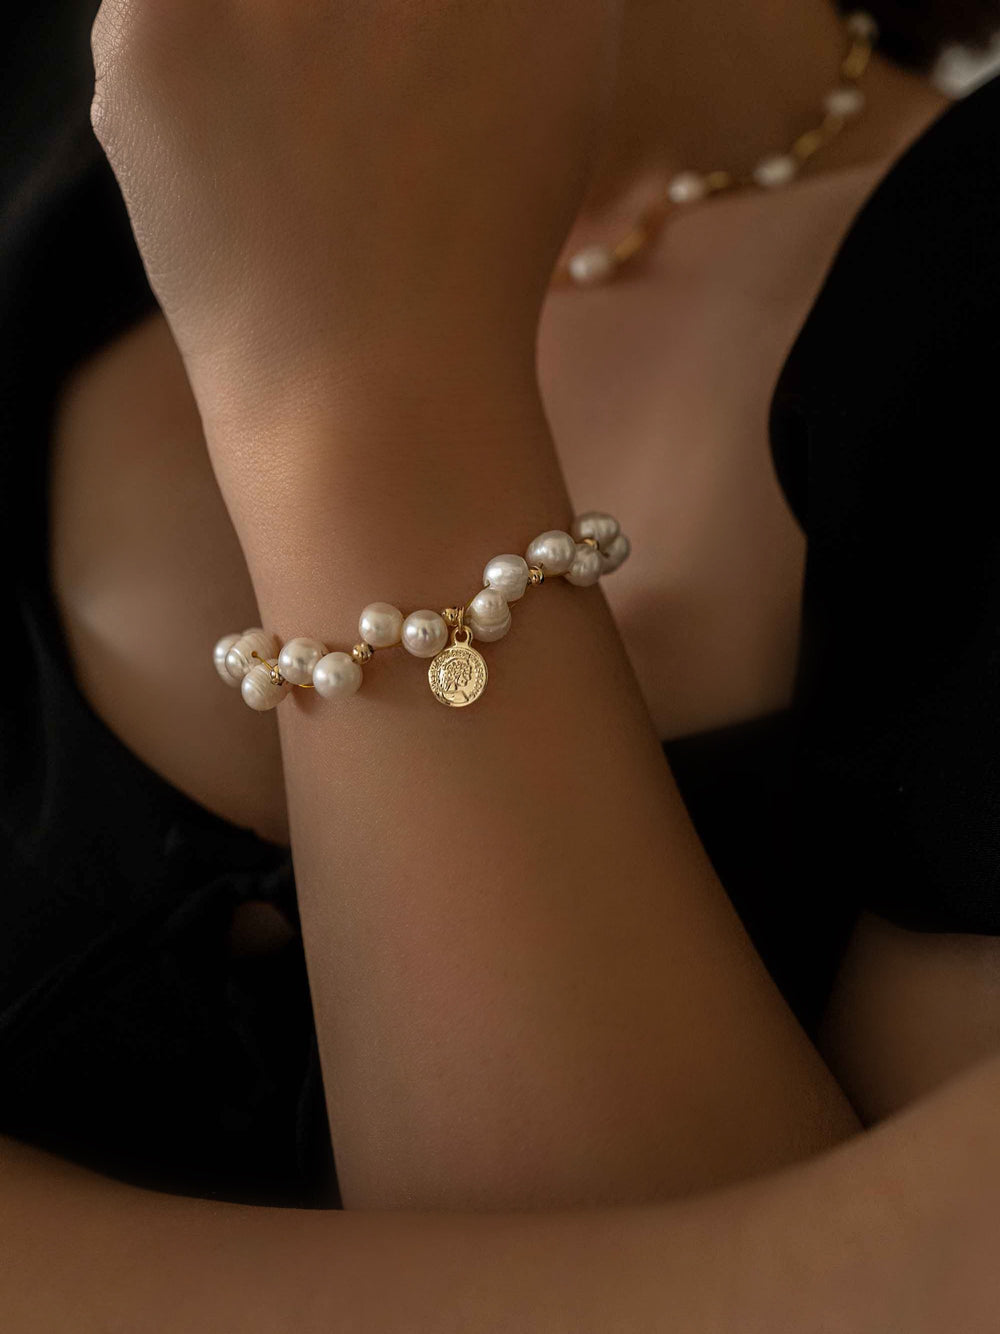 model wear A pearl bracelet with Roman gold coins